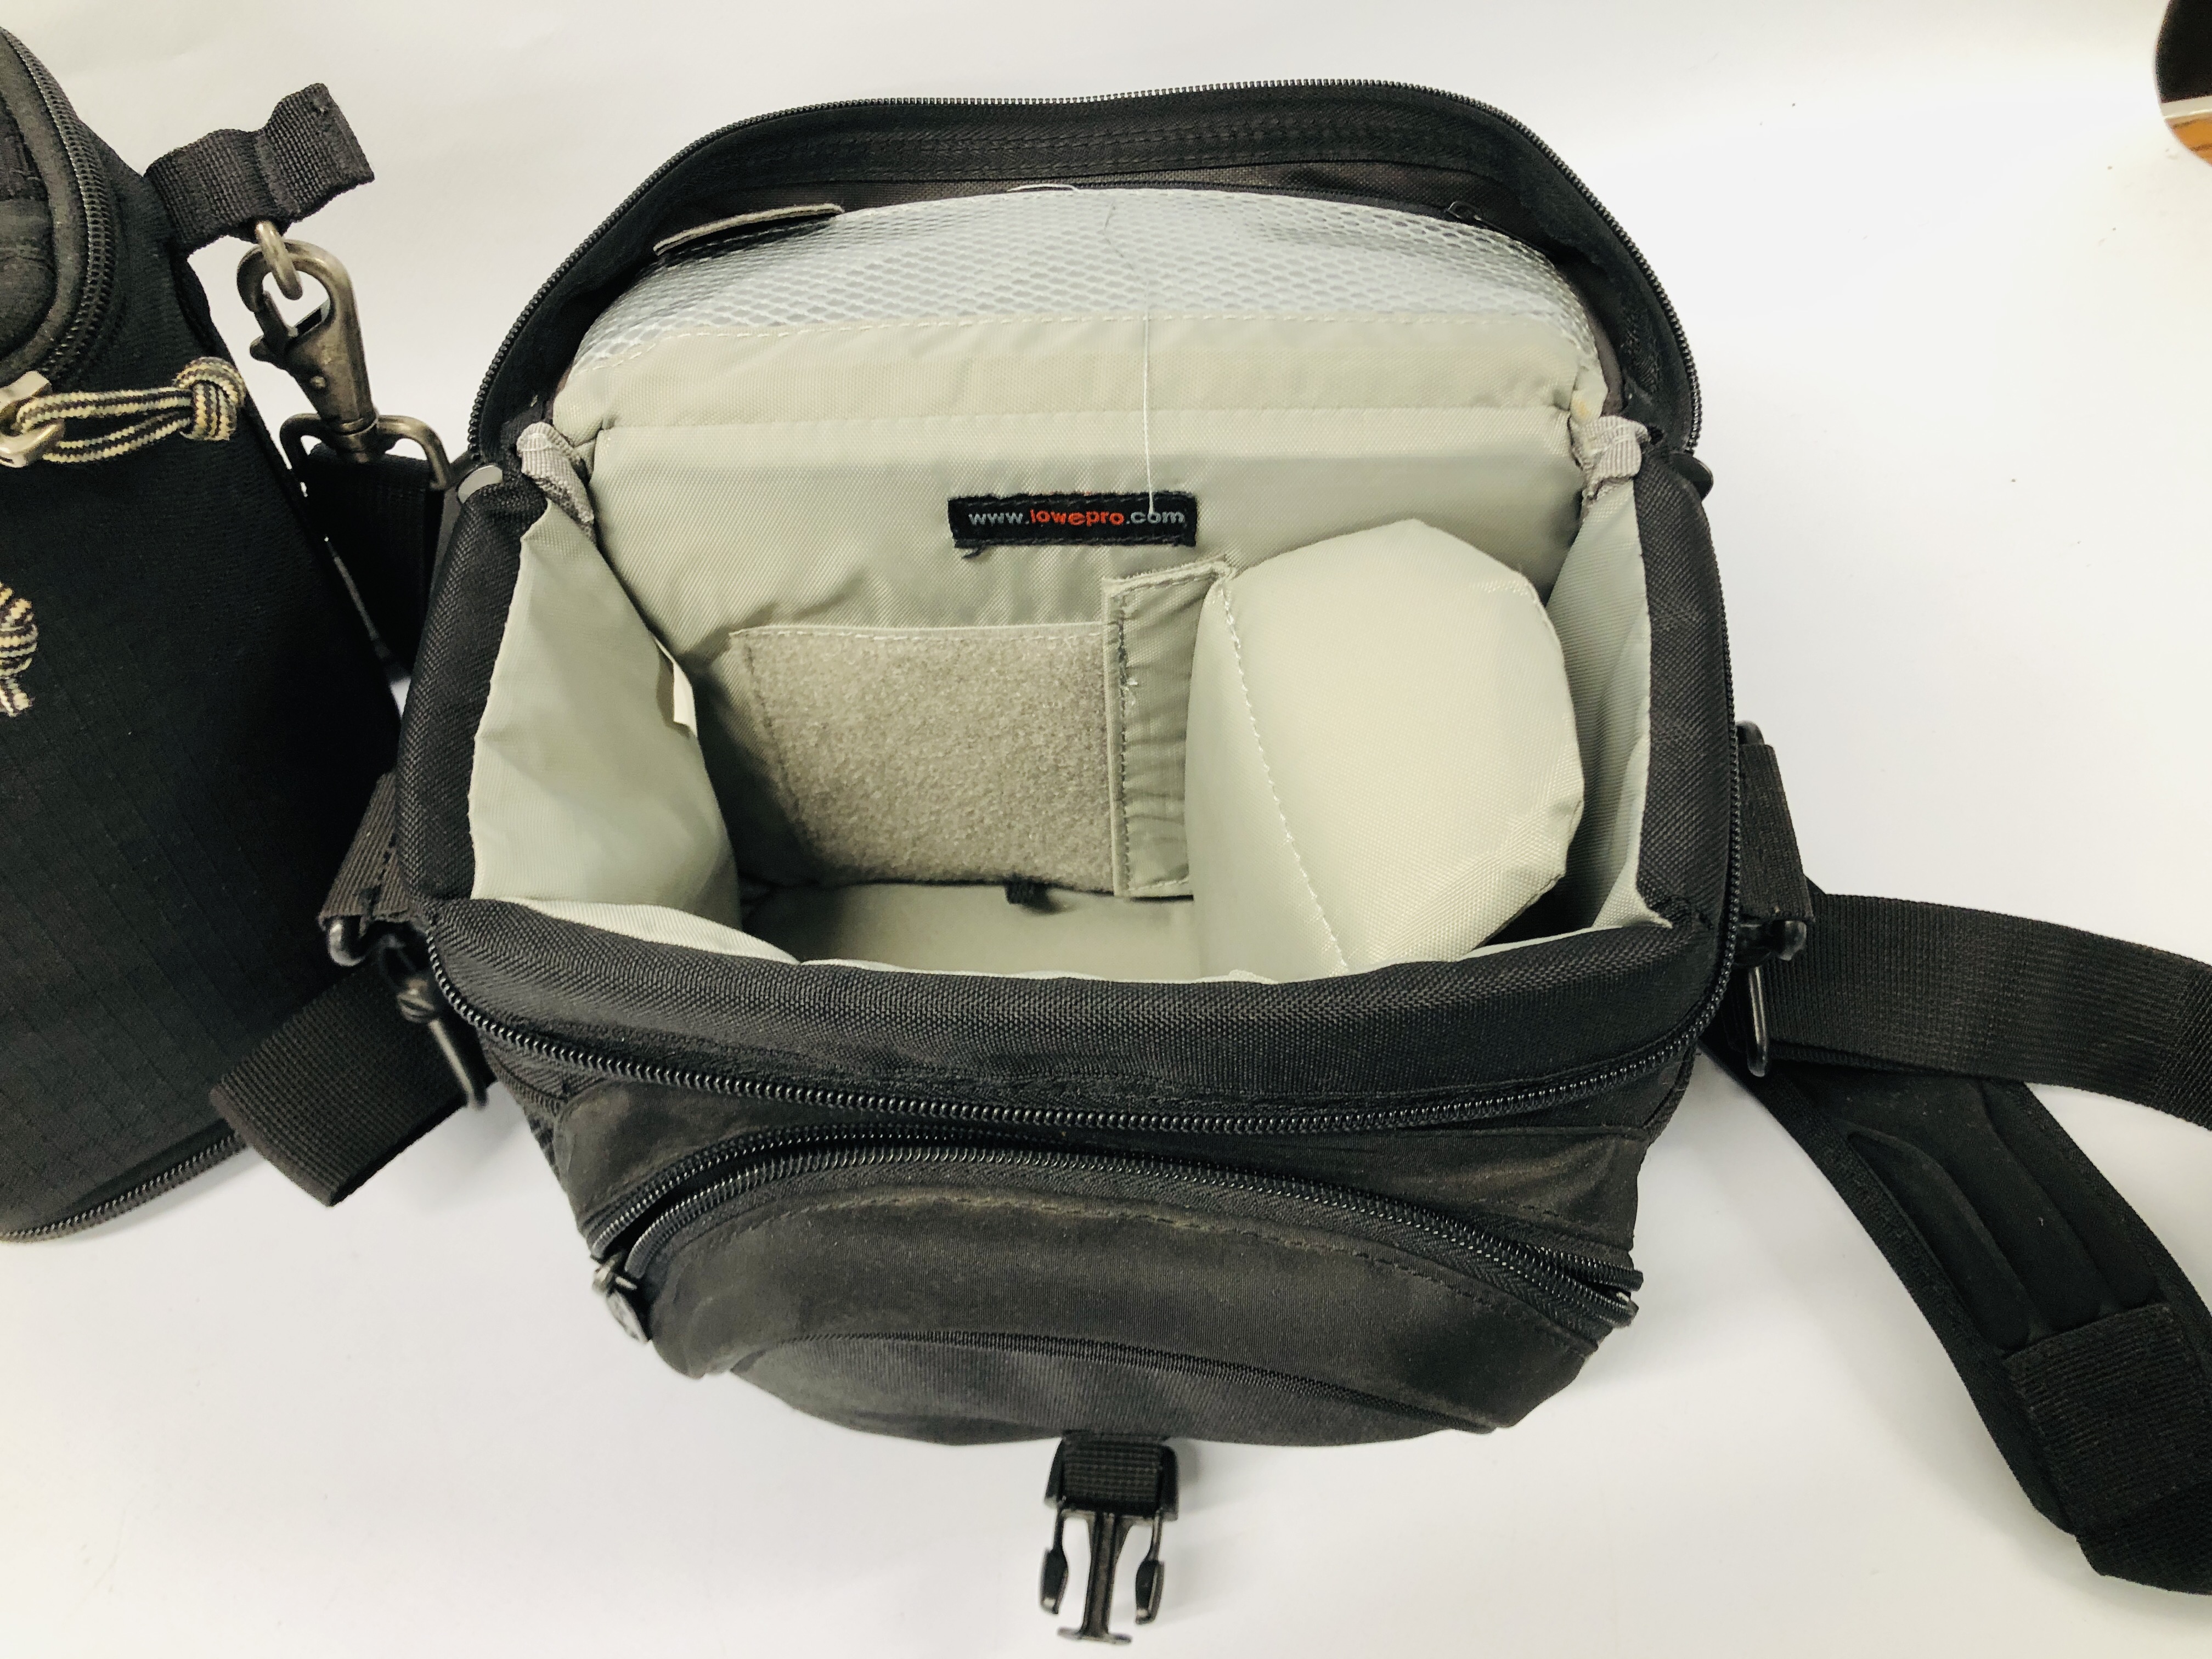 3 X VARIOUS PADDED CAMERA BAGS TO INCLUDE LOWPRO AND THINKTANK - Image 3 of 6